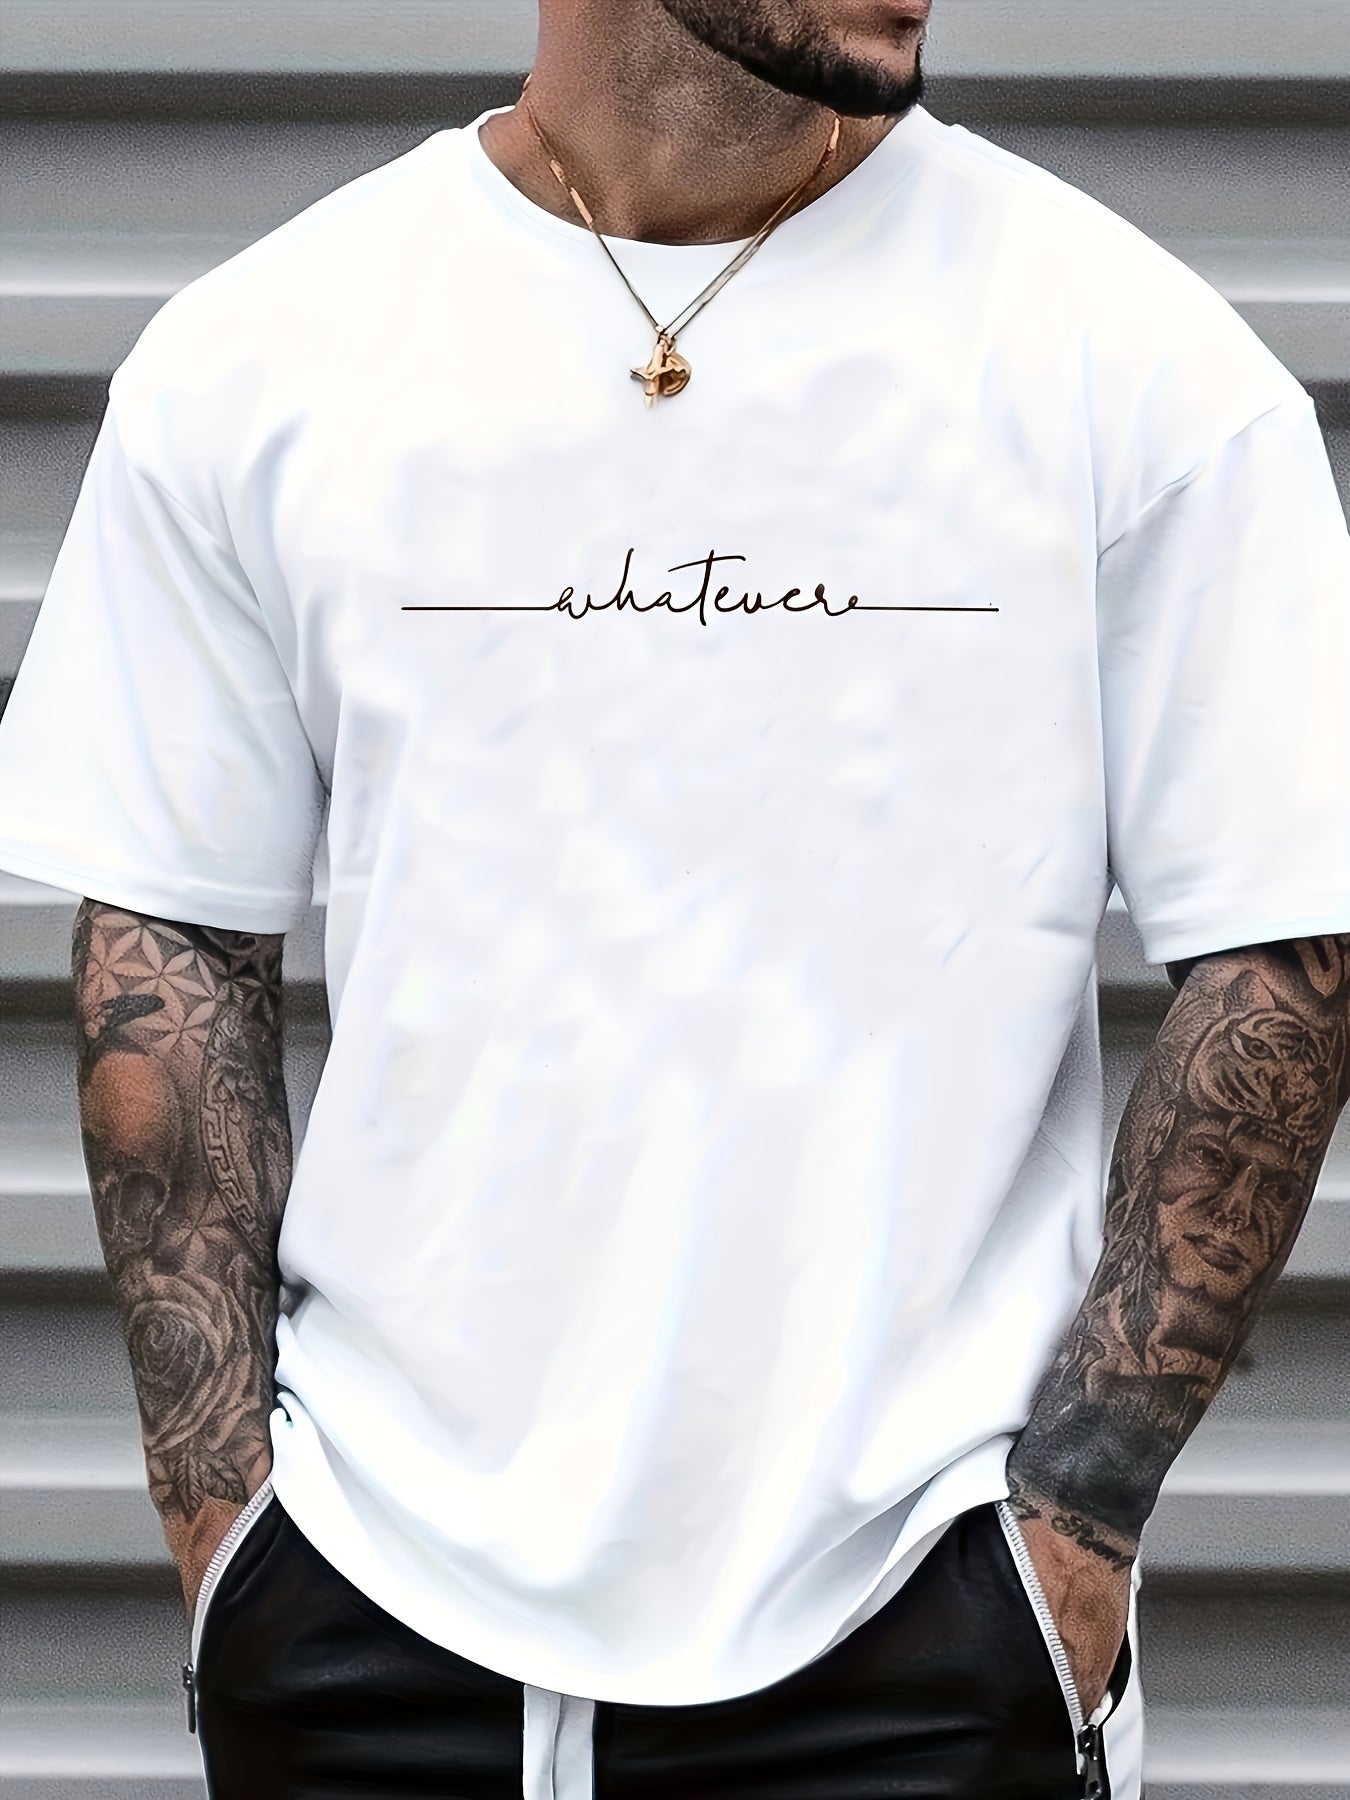 Men's Casual Trendy Letters Graphic Print Comfortable Crew Neck Short Sleeve T-shirts, Summer Top Tees